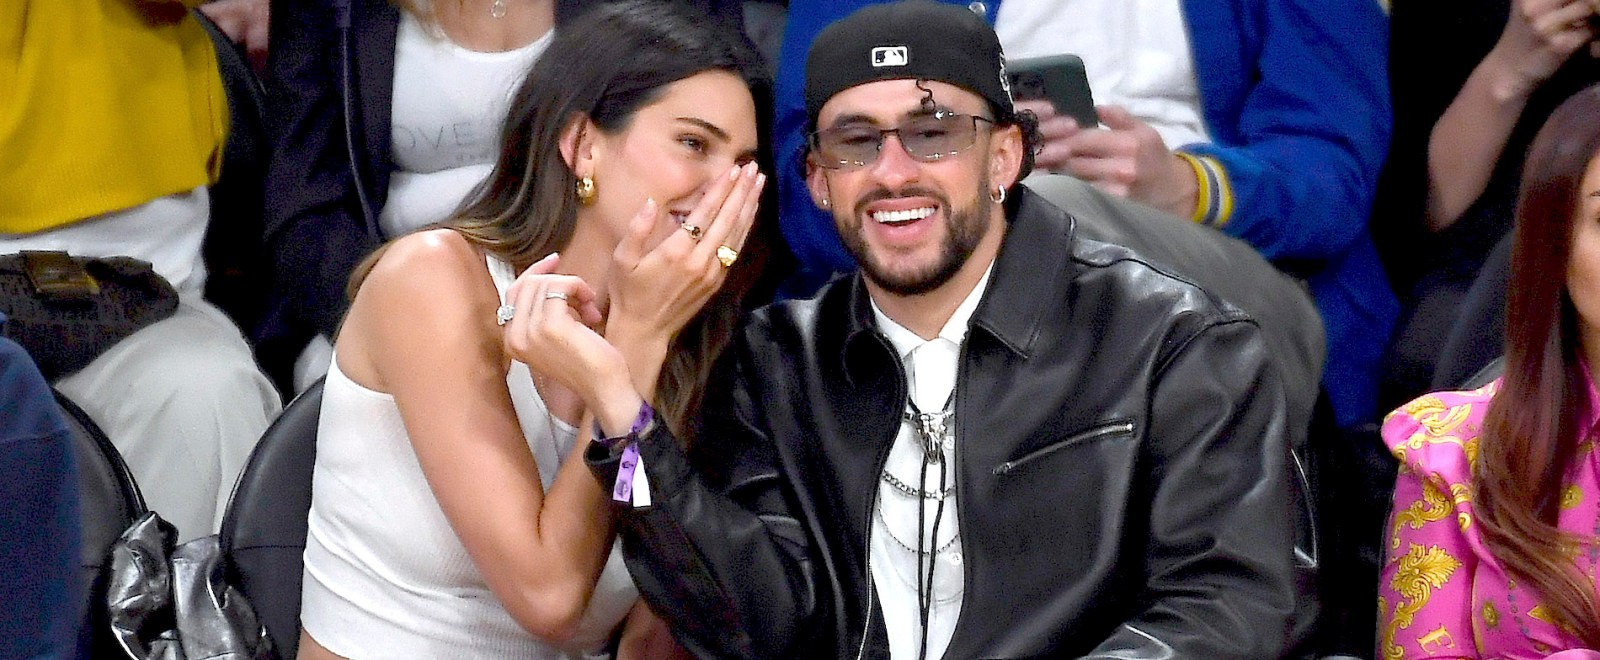 Bad Bunny, Kendall Jenner meme from Lakers game shows mansplaining